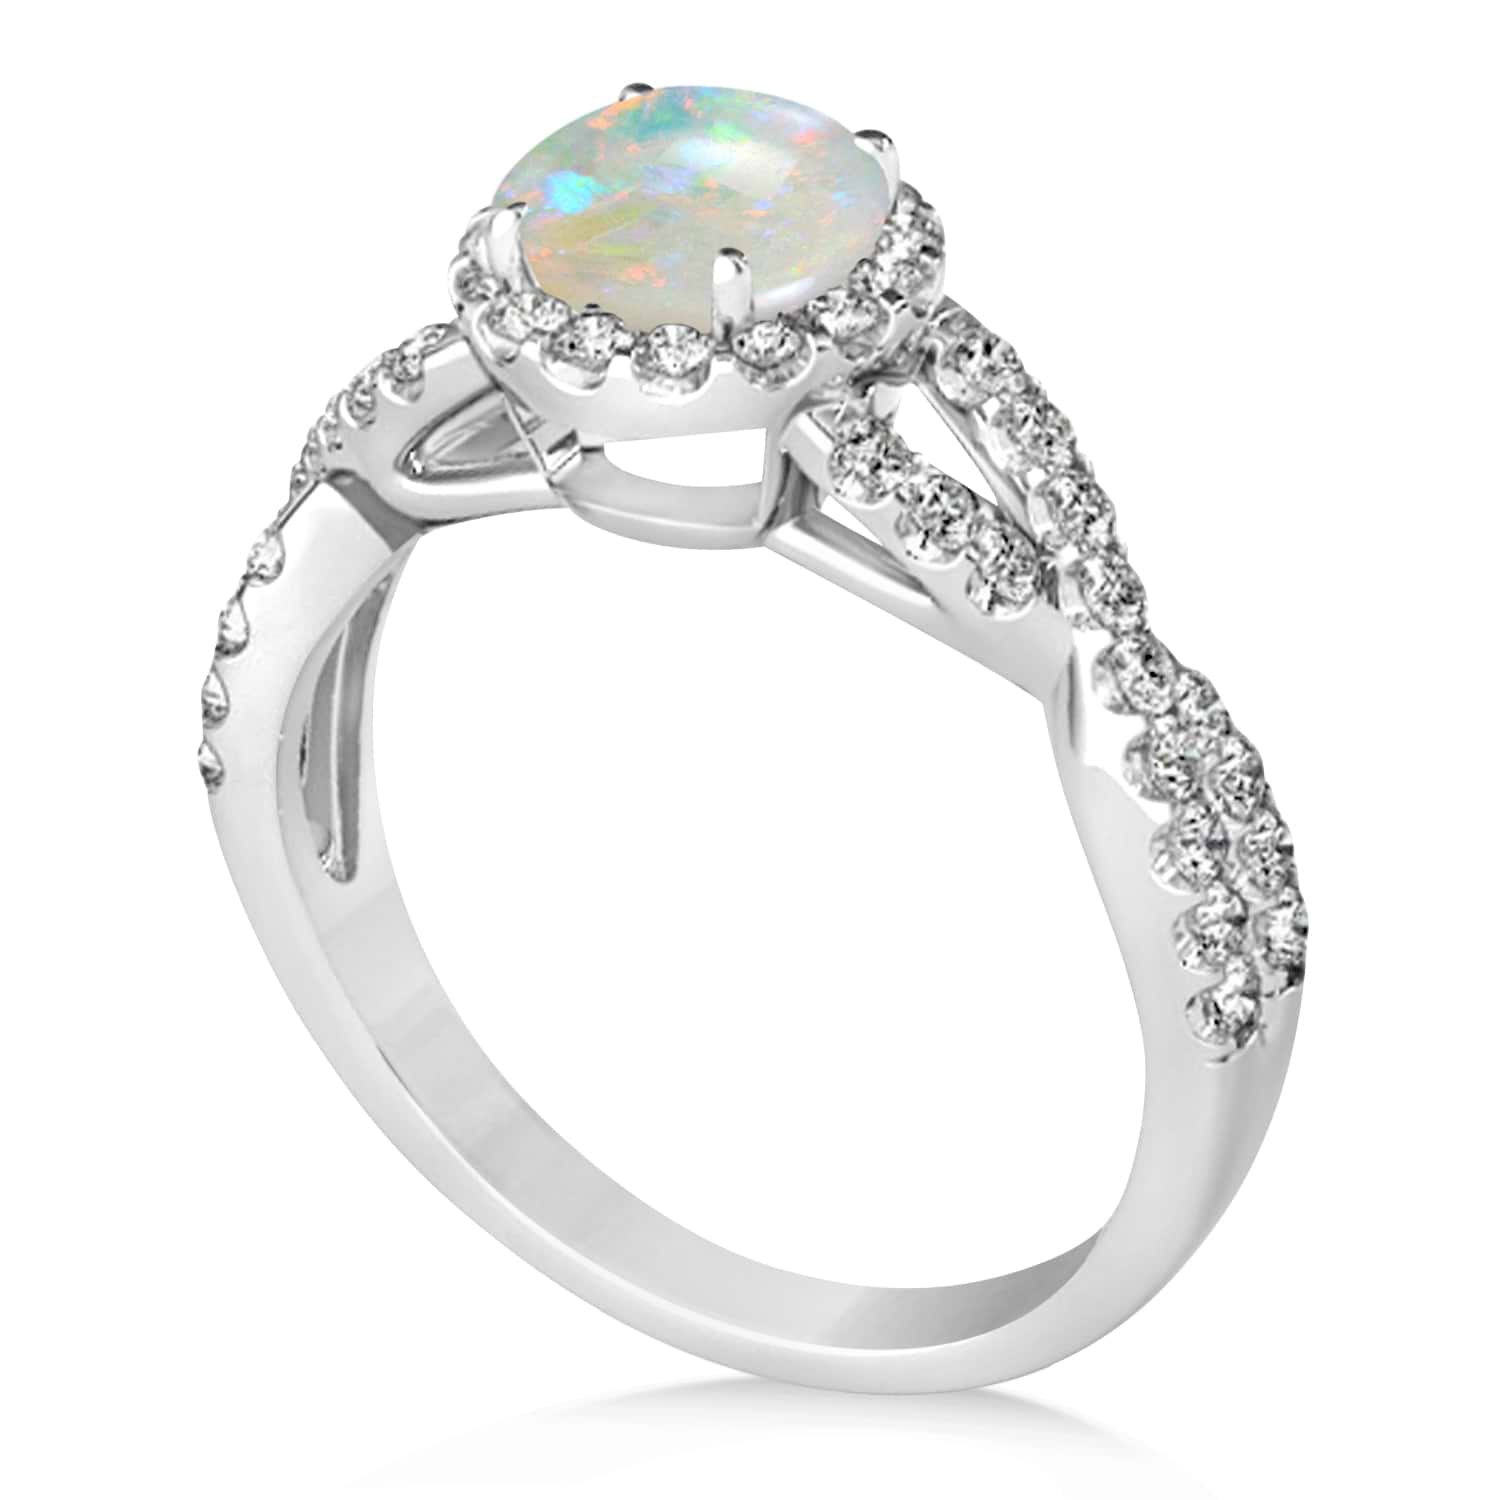 Opal & Diamond Twisted Engagement Ring 18k White Gold 1.07ct